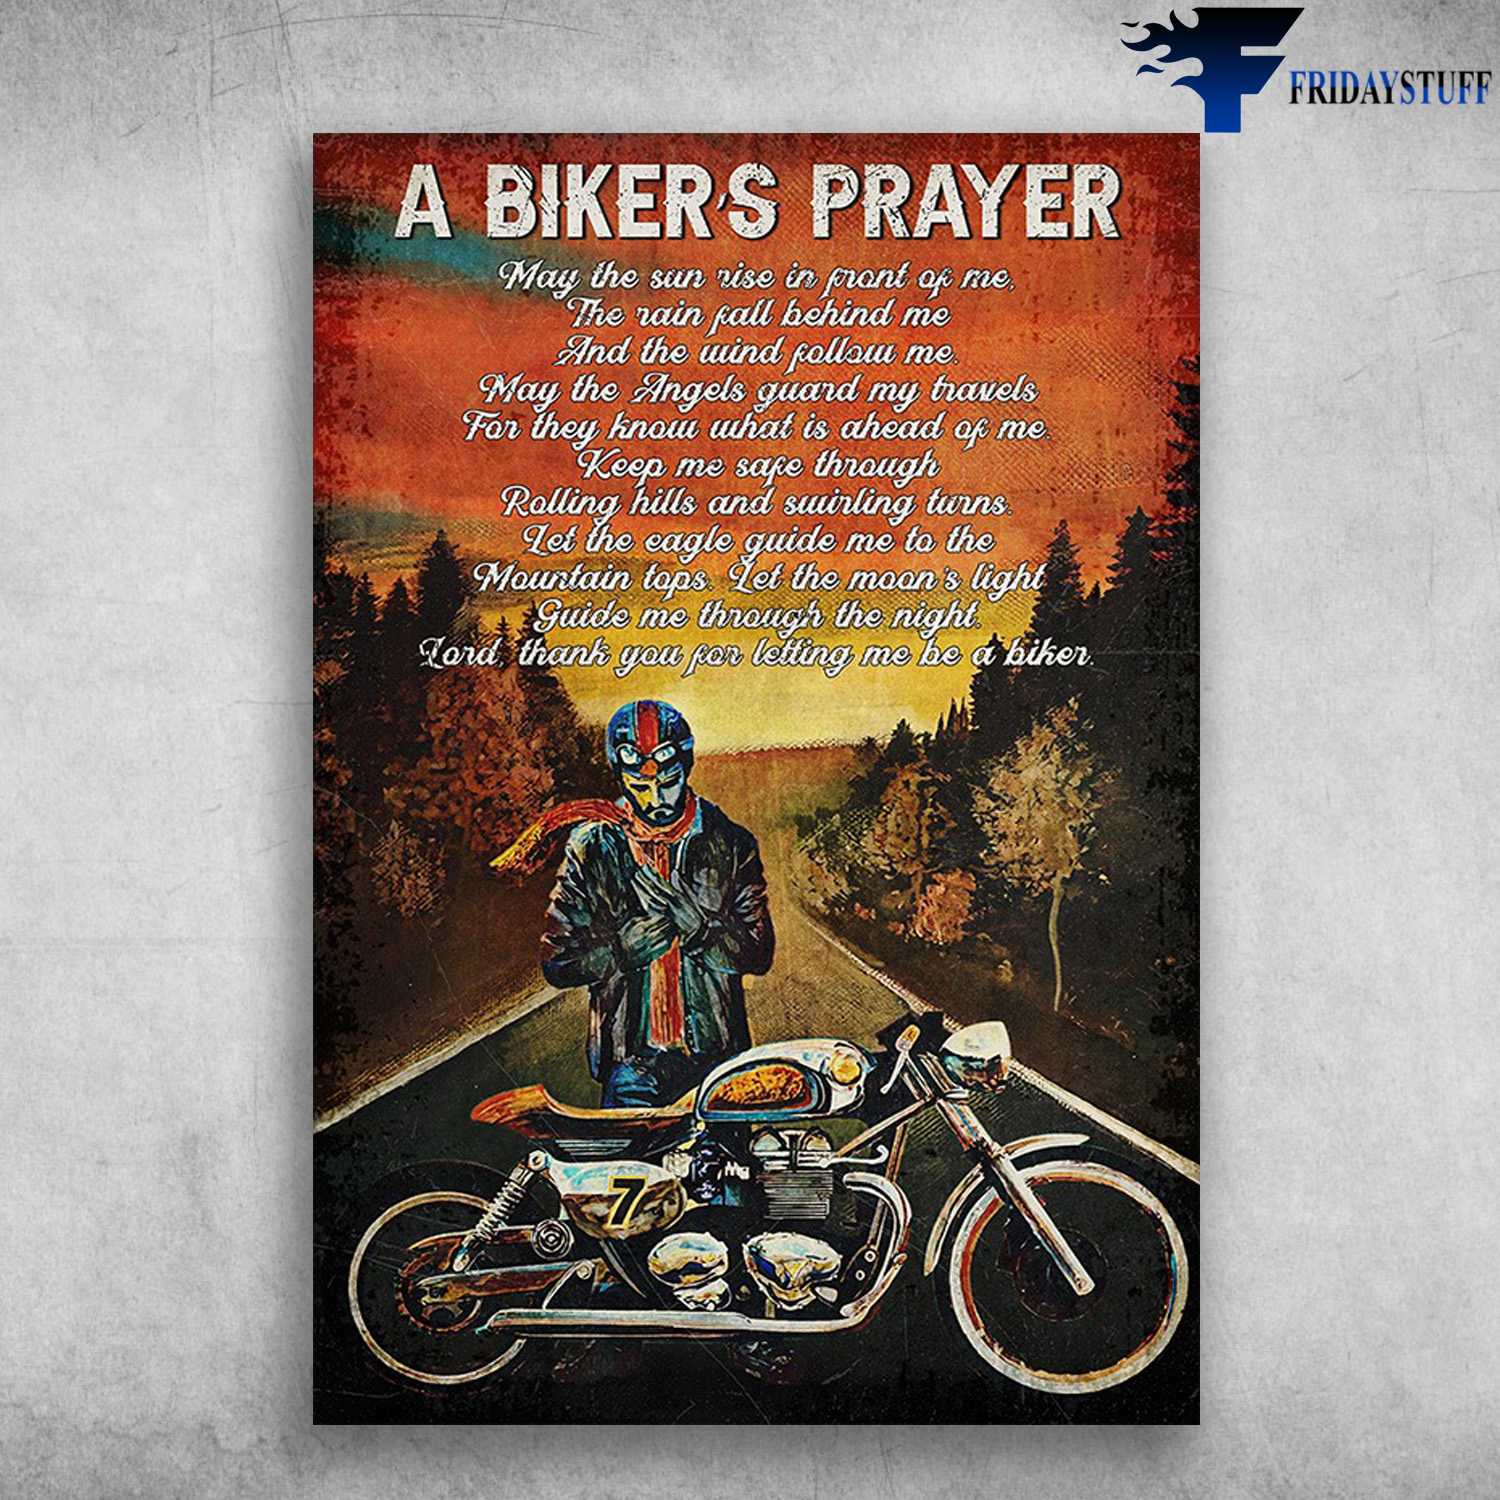 A Biker's Player, Motorcycle Man - May The Sun Rise In Pront Of Me, The Rain Fall Behind Me, And The Wind Follow Me, My The Angels Guard My Travels